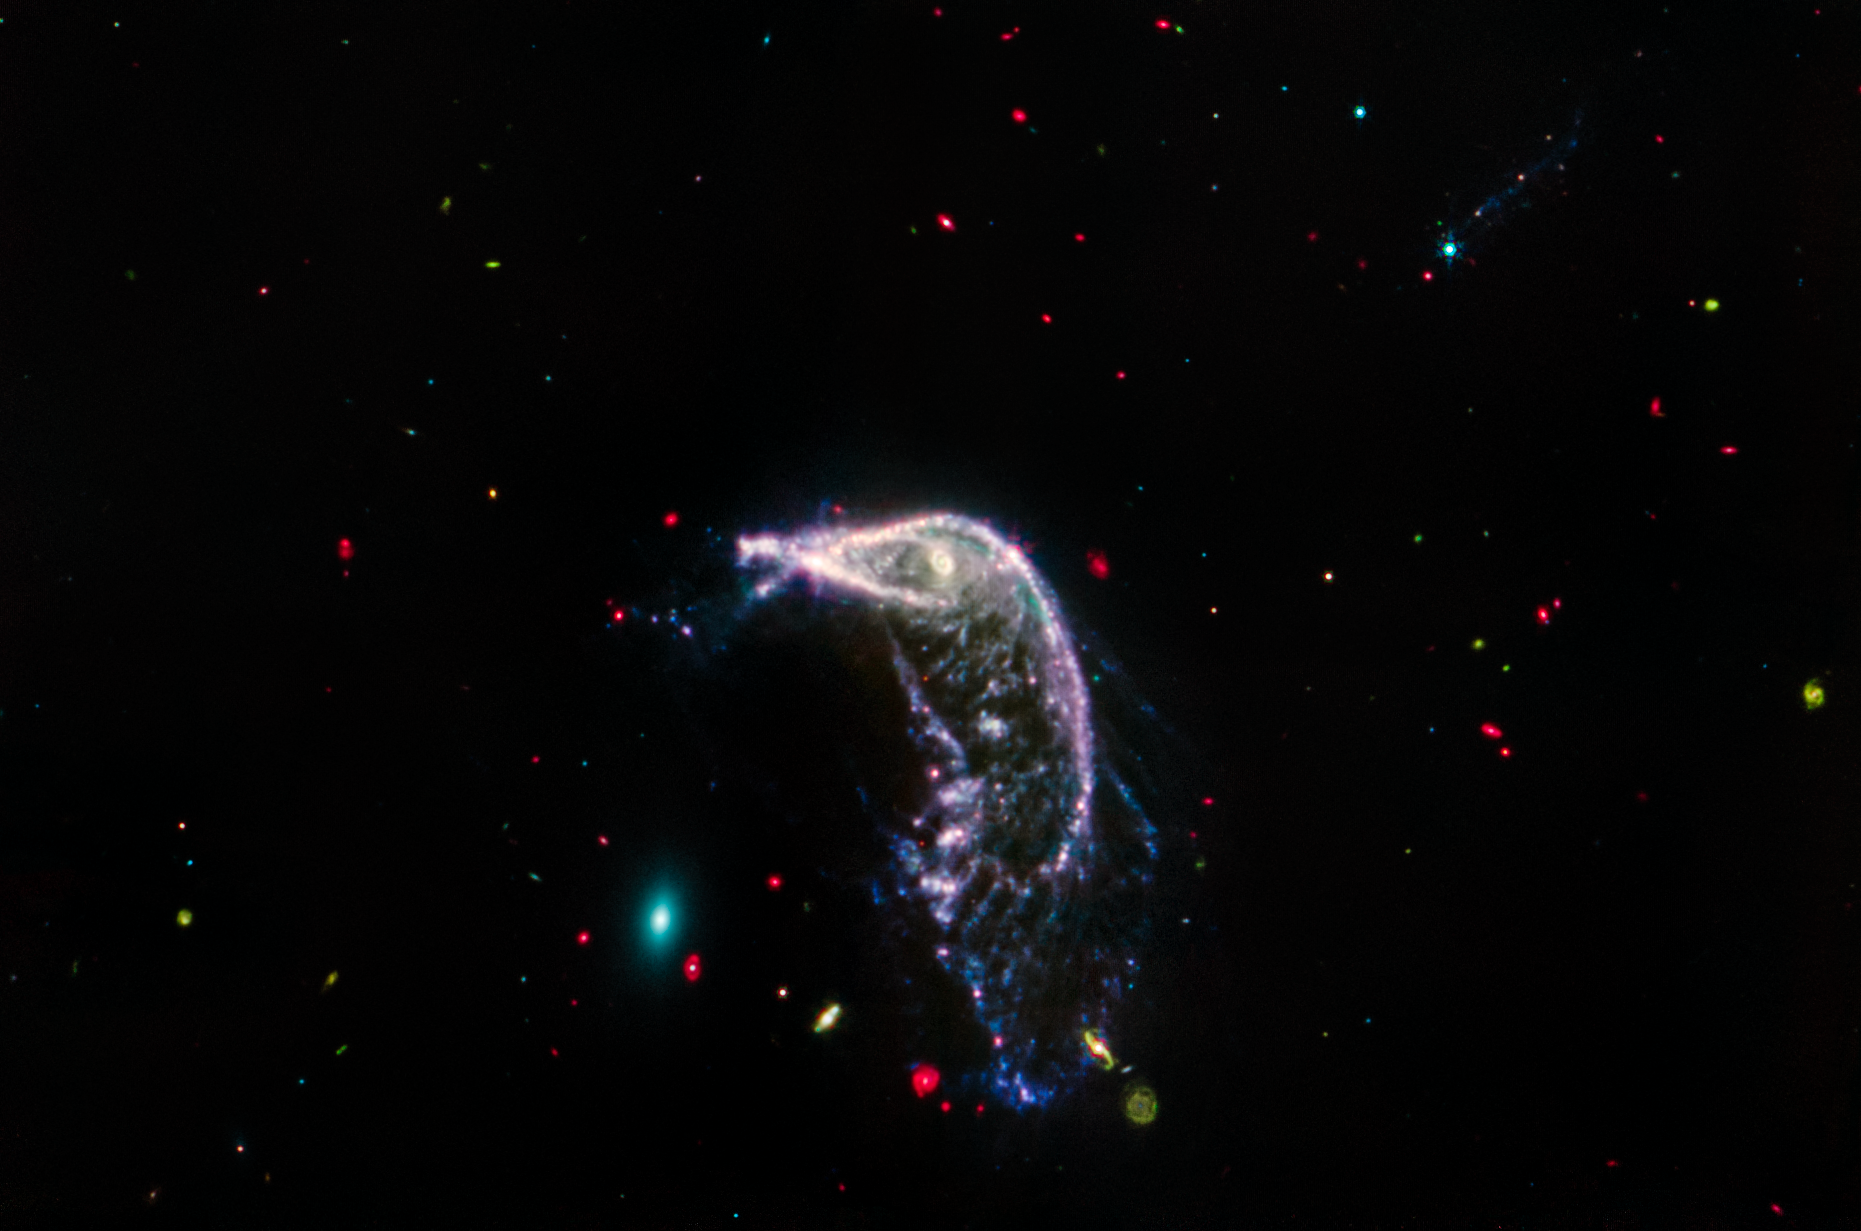 Two interacting galaxies known as Arp 142 in a horizontal image taken in mid-infrared light. At left is NGC 2937, an elliptical galaxy that looks like a tiny teal oval and is nicknamed the Egg. At right is NGC 2936, a distorted spiral galaxy nicknamed the Penguin, which is significantly larger. A beak-like region points toward the Egg, but lies far above it. Where the eye would be is an opaque, almost washed-out pink spiral. This galaxy’s distorted pink, purple, and blue arms create the bird’s beak, back, and tail. The tail, which is closer to the Egg, is wide and layered, like a beta fish’s tail. The Penguin and the Egg appear very separate. The galaxy at top right, PGC 1237172, is barely visible. A brighter slightly larger blue foreground star that is overtop this galaxy has tiny diffraction spikes. Throughout the image are tiny galaxies in bright reds, greens, and blues. The background of space is black.